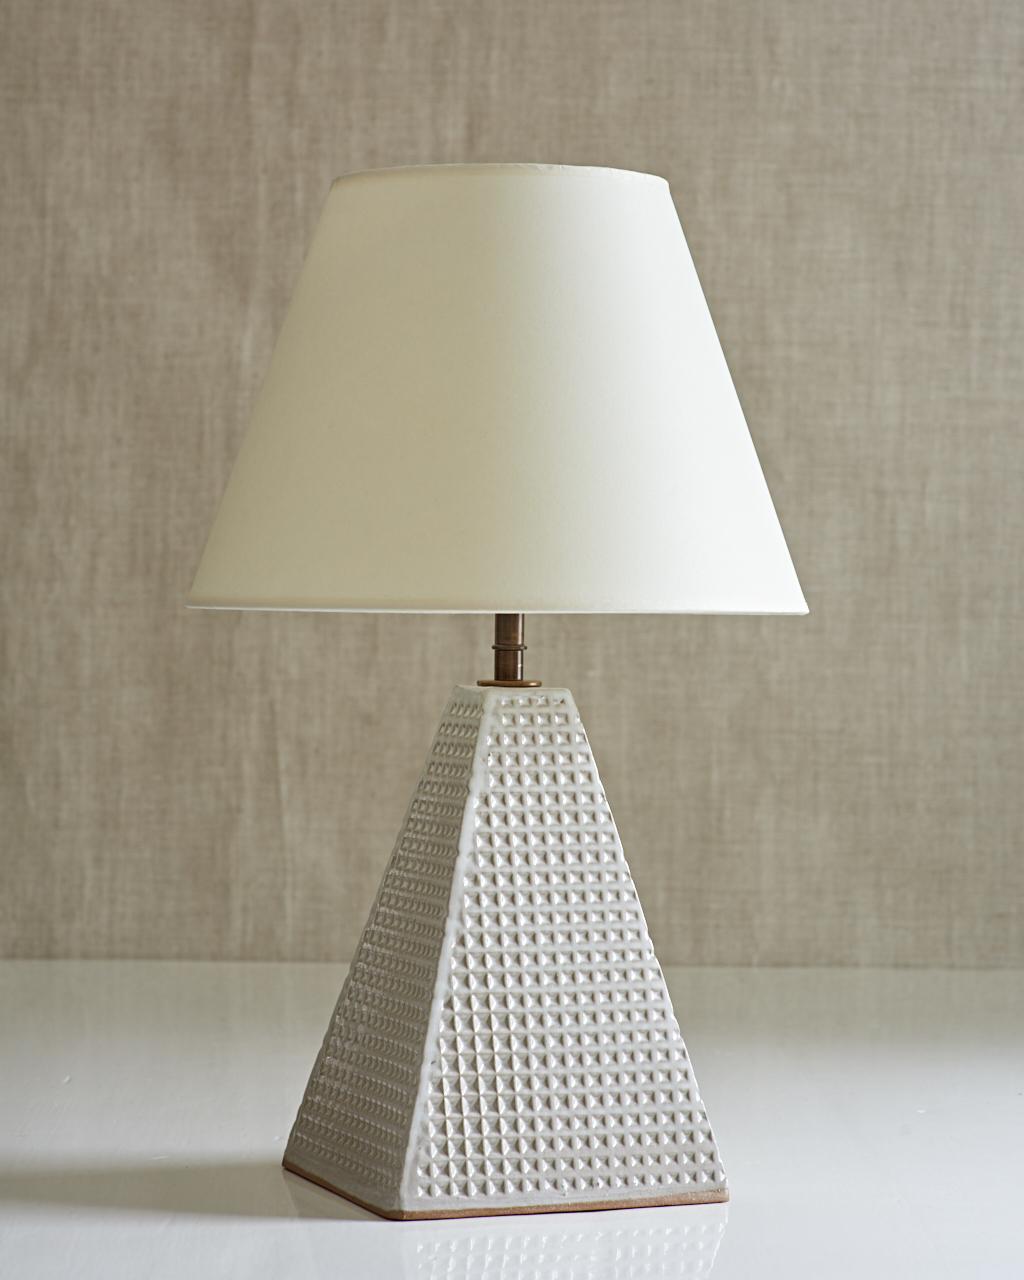 Handmade stoneware slab construction with waffle texture. Lamps are individually crafted and one of a kind.

Chalk white glaze with waffle texture. Antique brass fittings with braided black silk cord and off-white paper shade.

Measures: Steeple